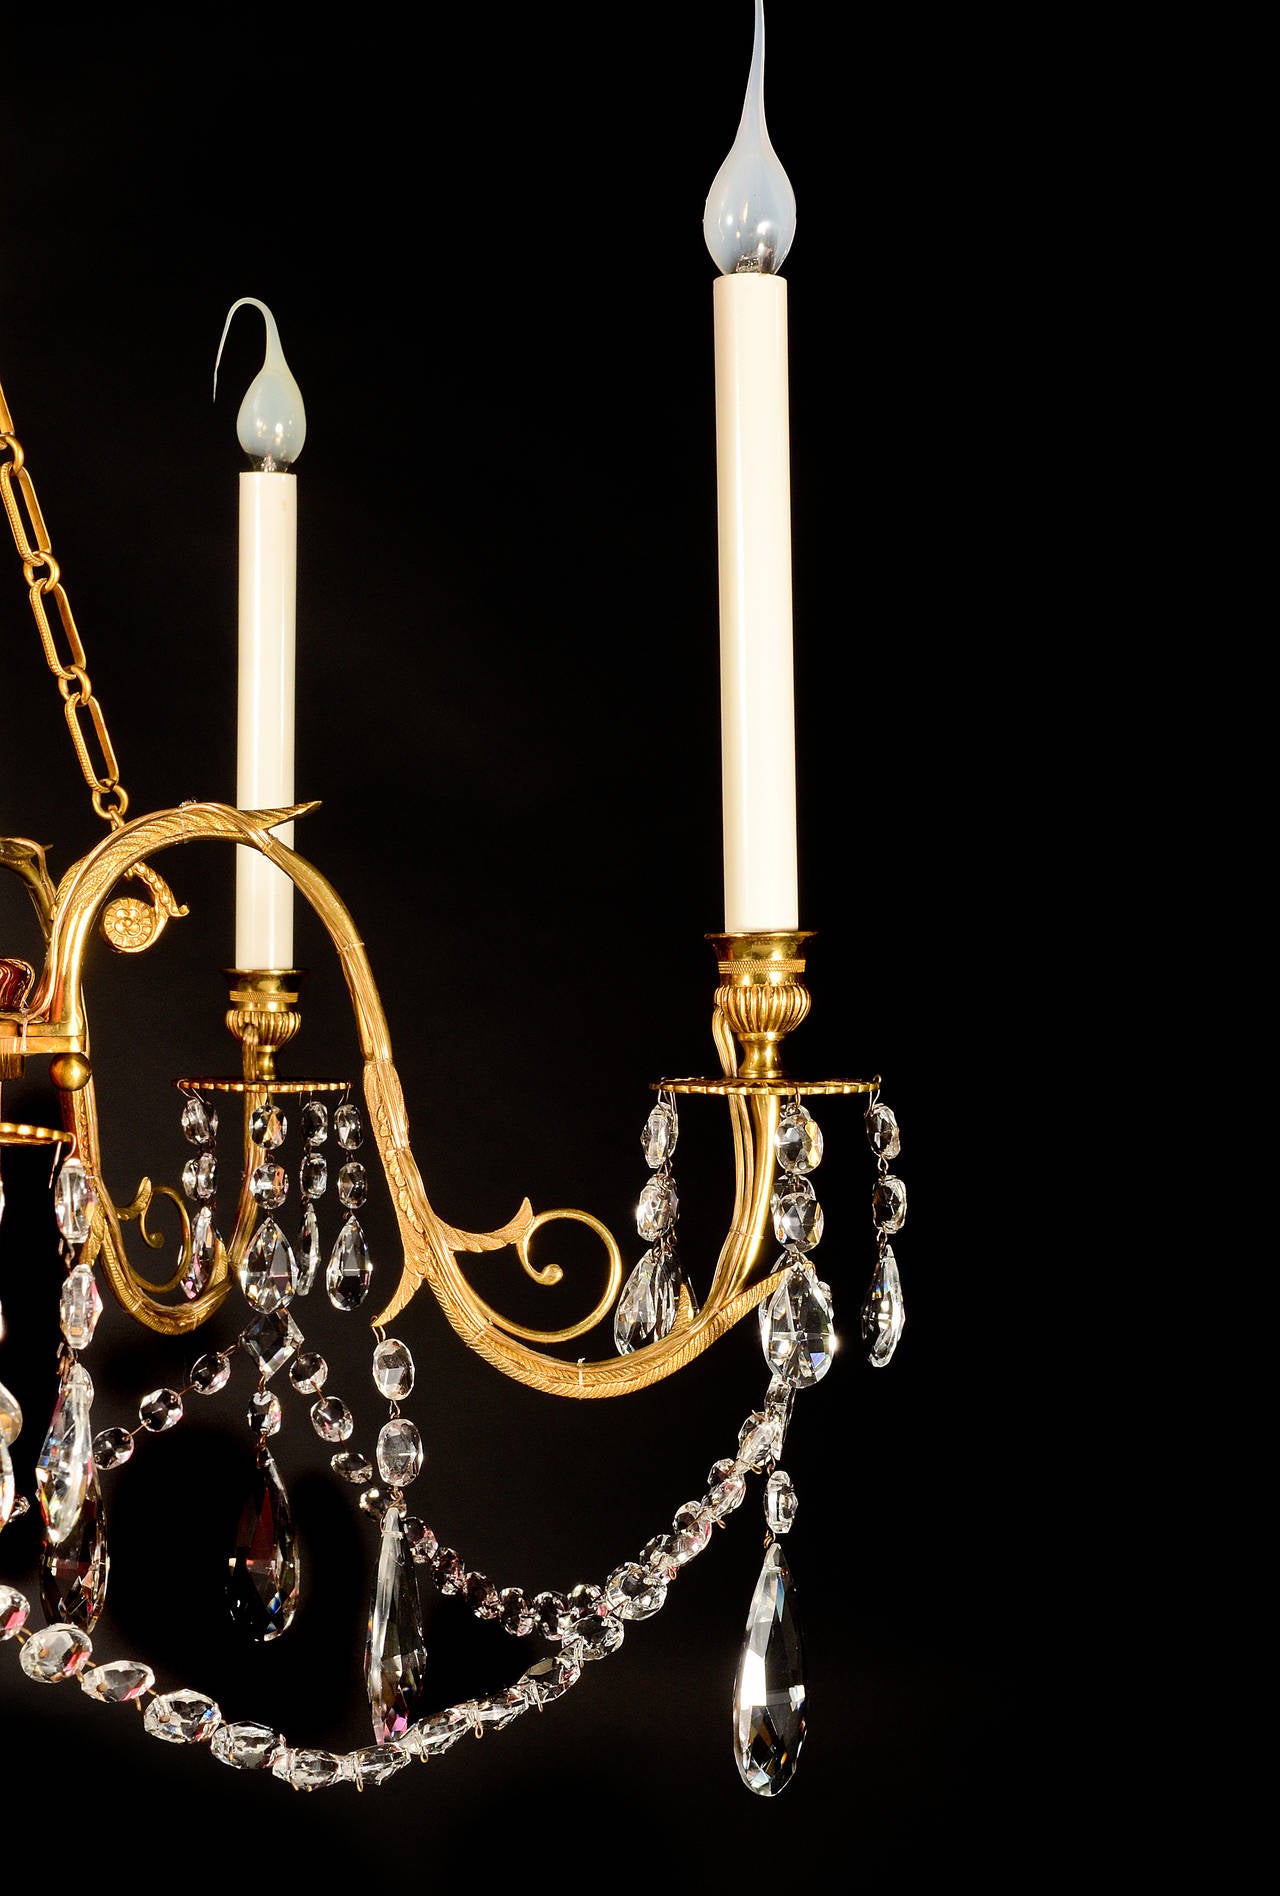 19th Century Antique Russian Neoclassical Gilt Bronze, Crystal and Cranberry Glass Chandelier